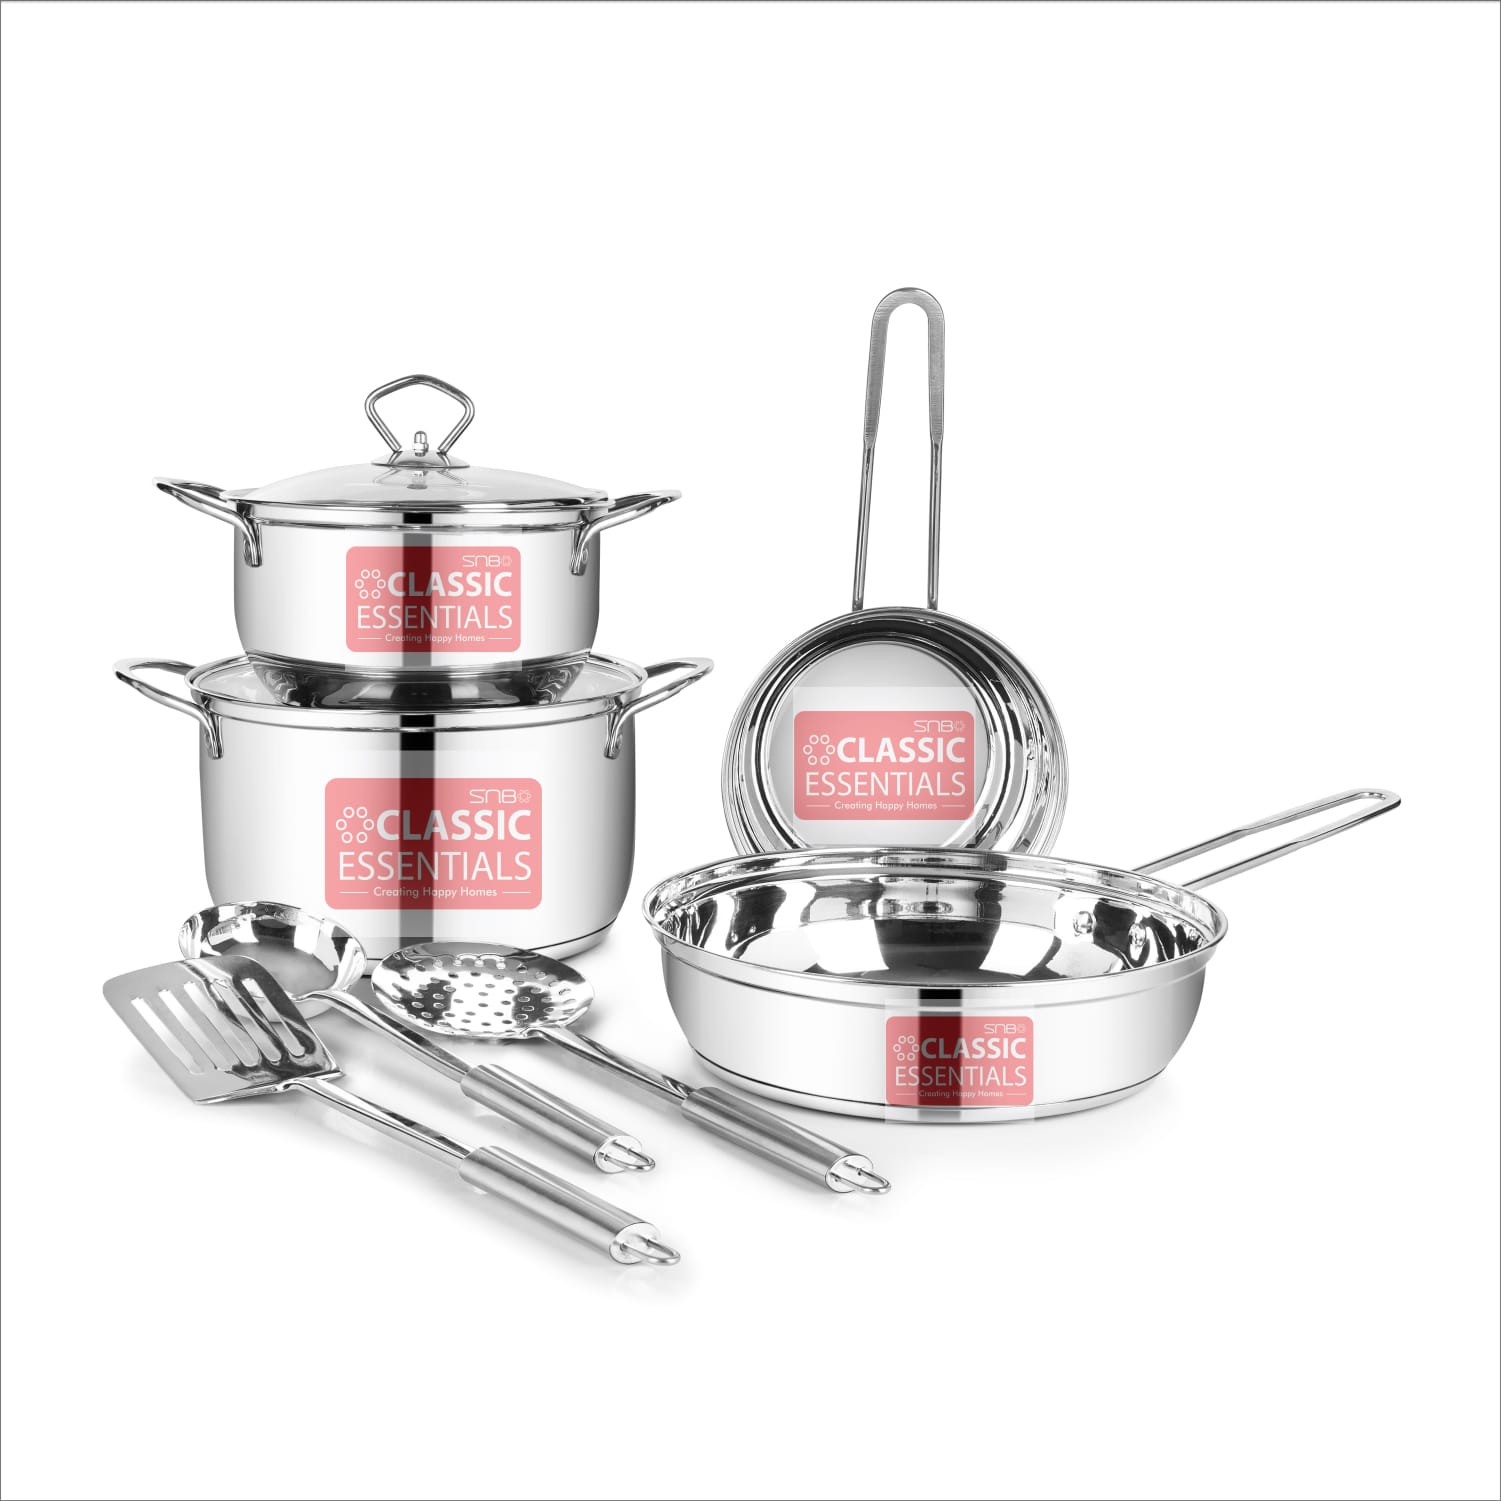 Basic Necessities comes with high quality cookware and kitchenware in stainless-steel